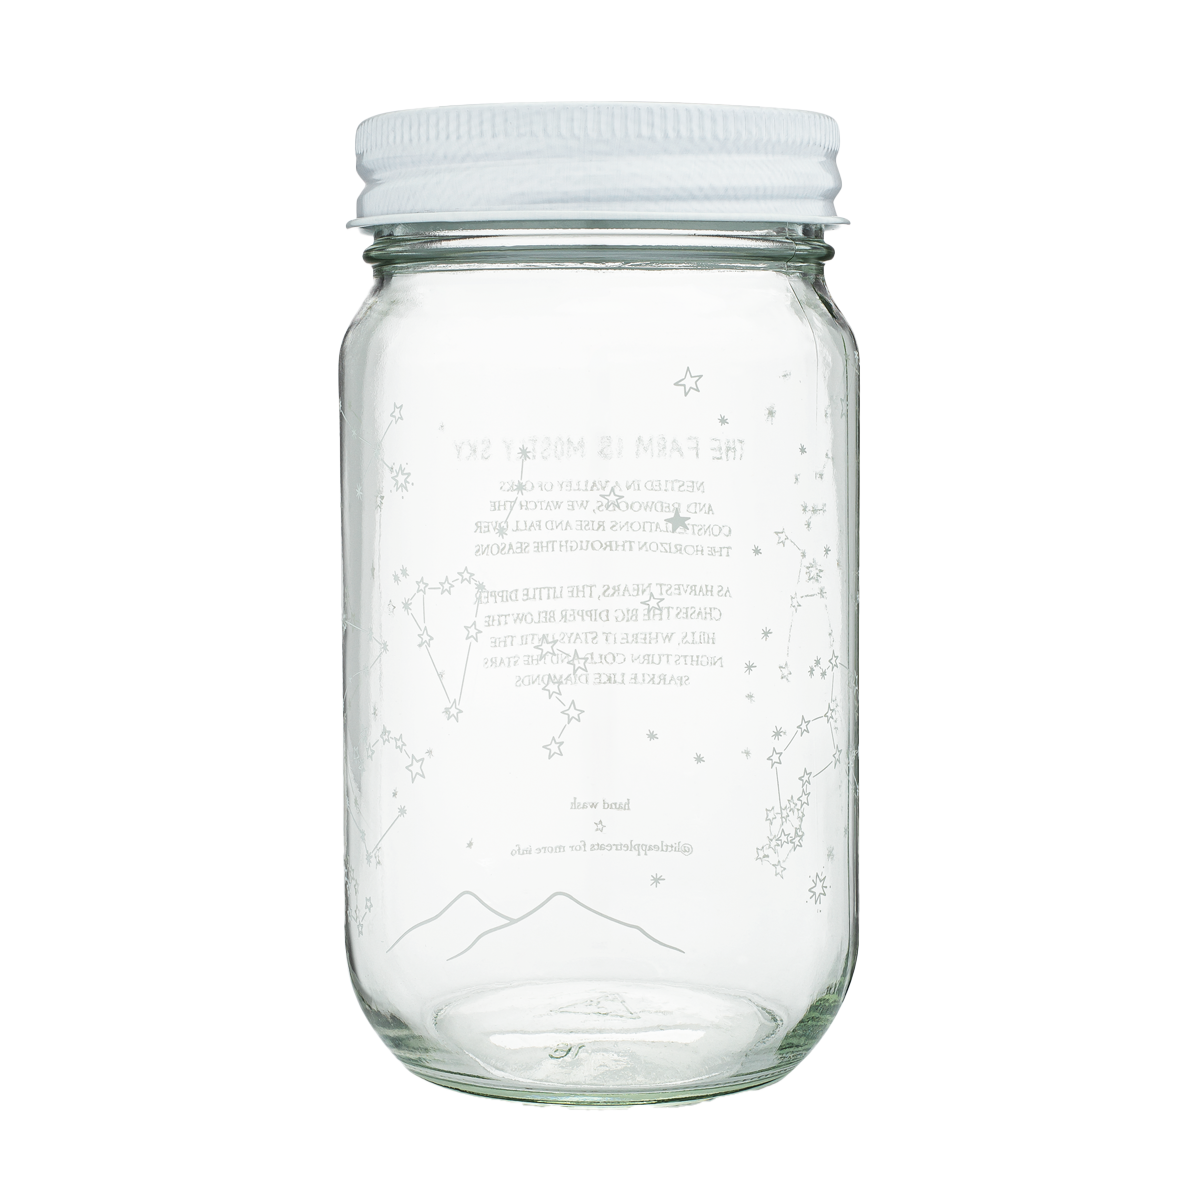 Limited Edition Cocktail Jars: The Farm Is Mostly Sky- Little